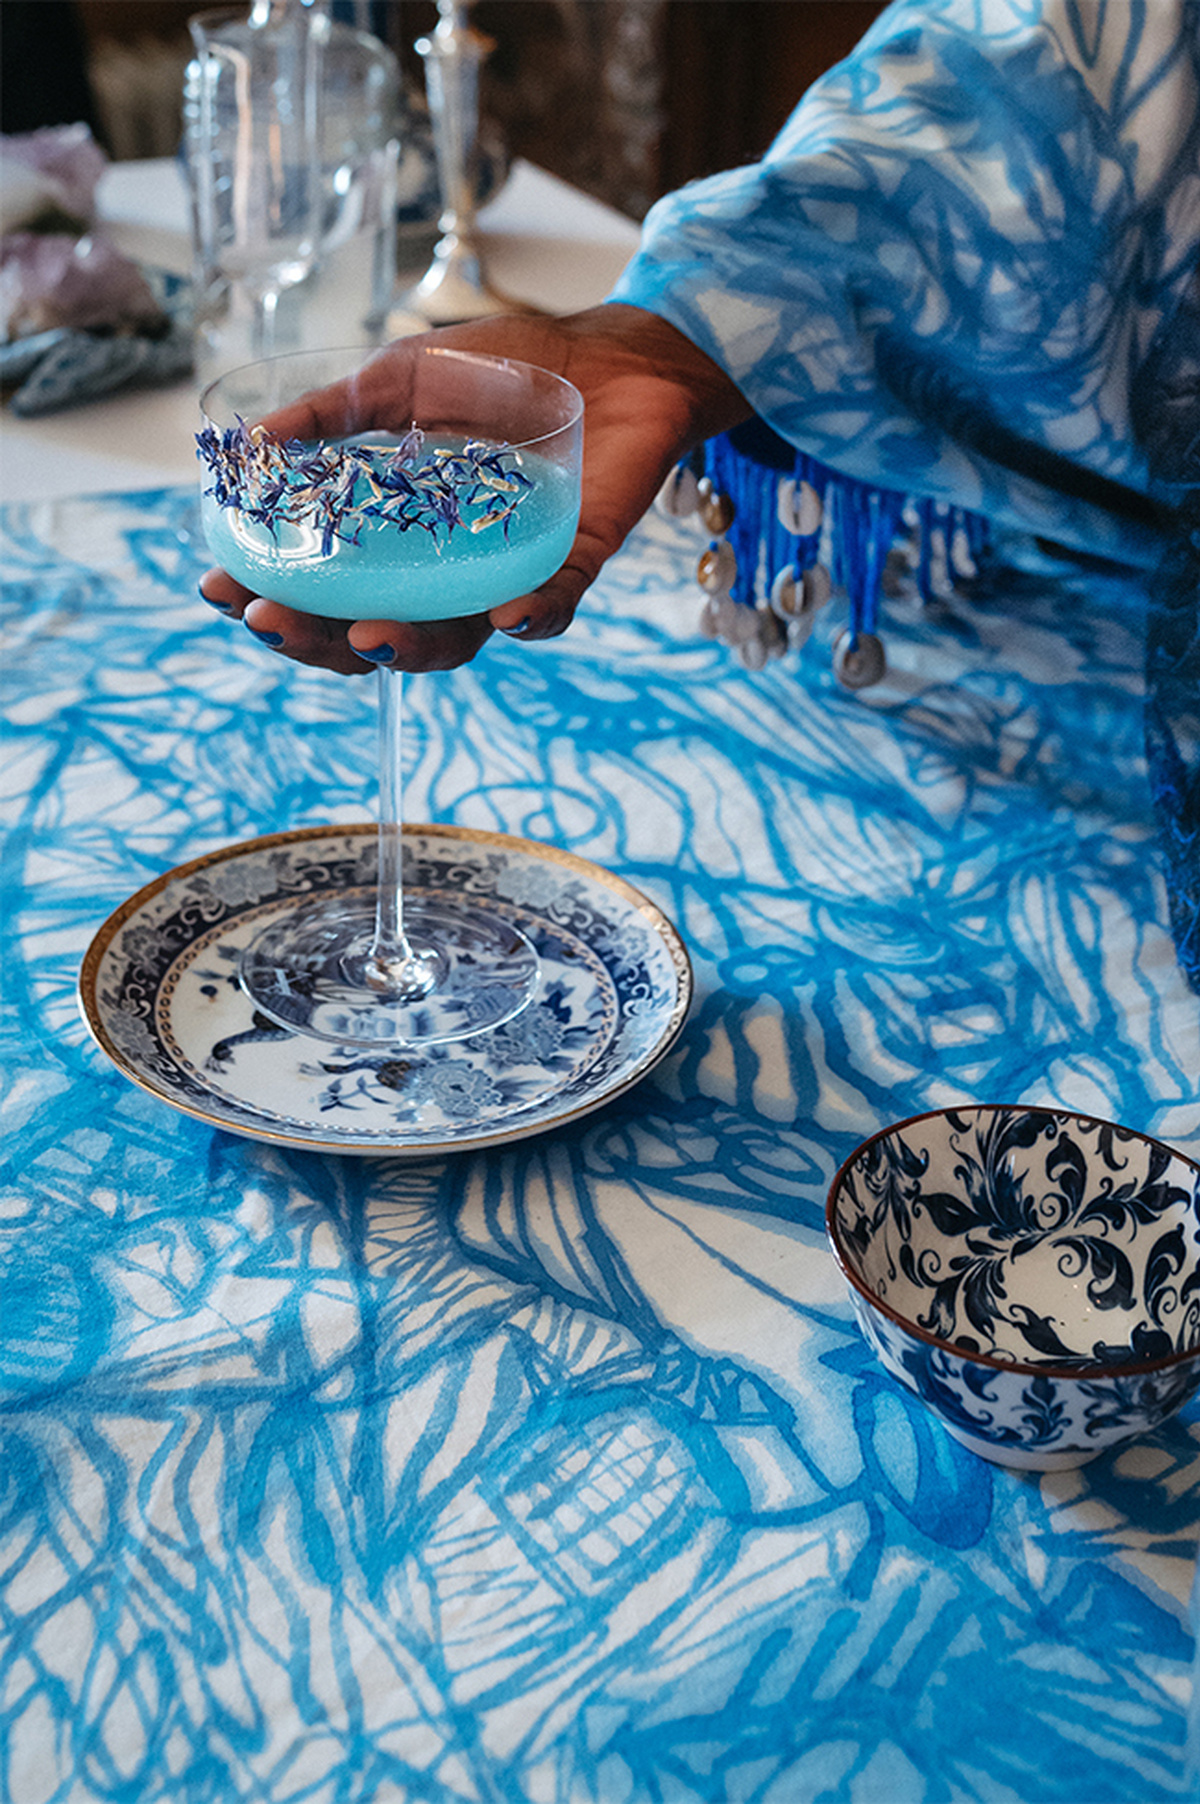 A photo of Sekai's hand placing a blue drink in an ornate glass on to bright blue streaked table cloth.